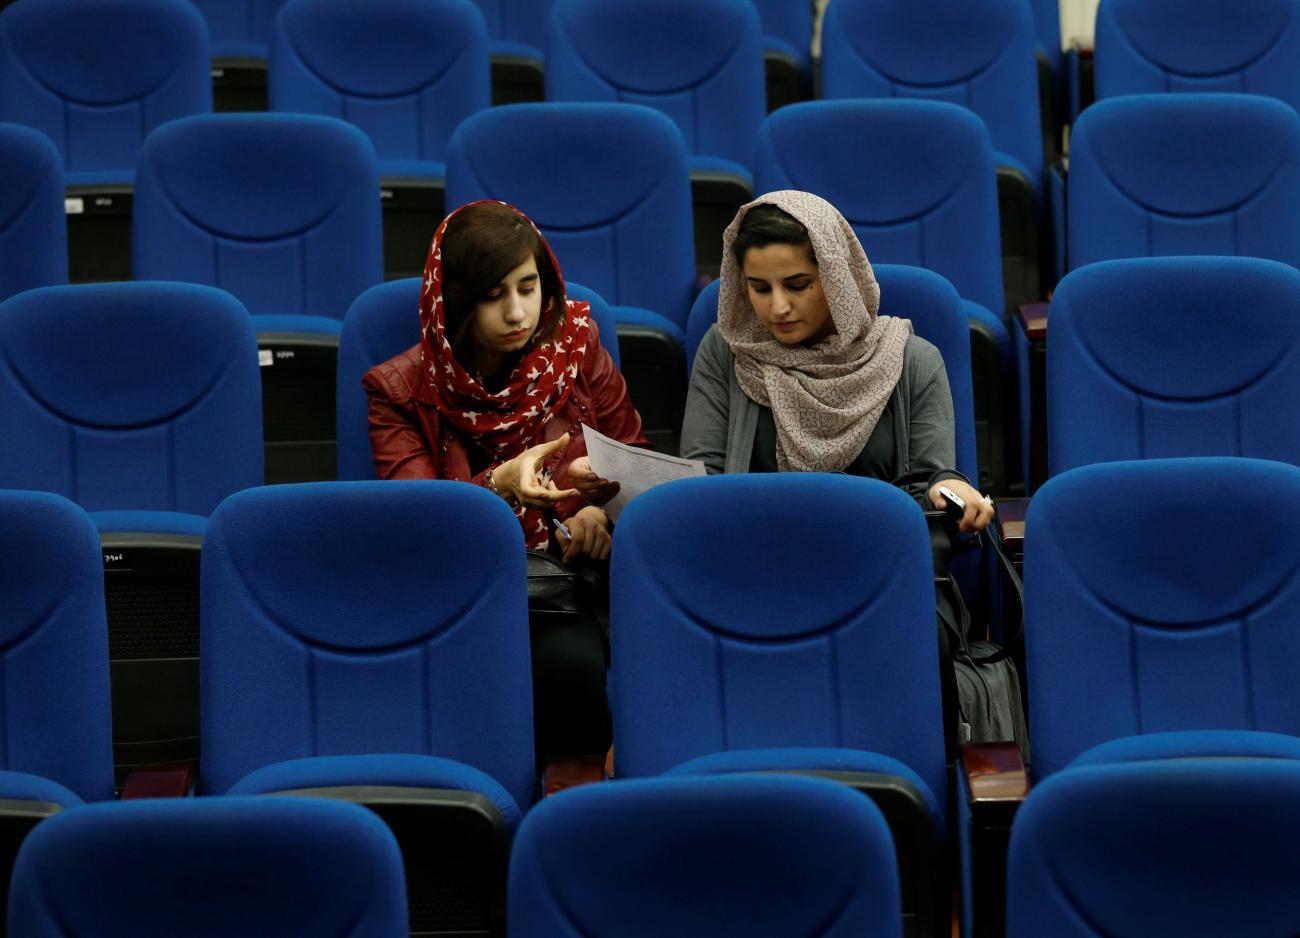 Students of American University of Afghanistan attended new student orientation sessions in Kabul, on March 27, 2017—years before the ban on female education took effect.